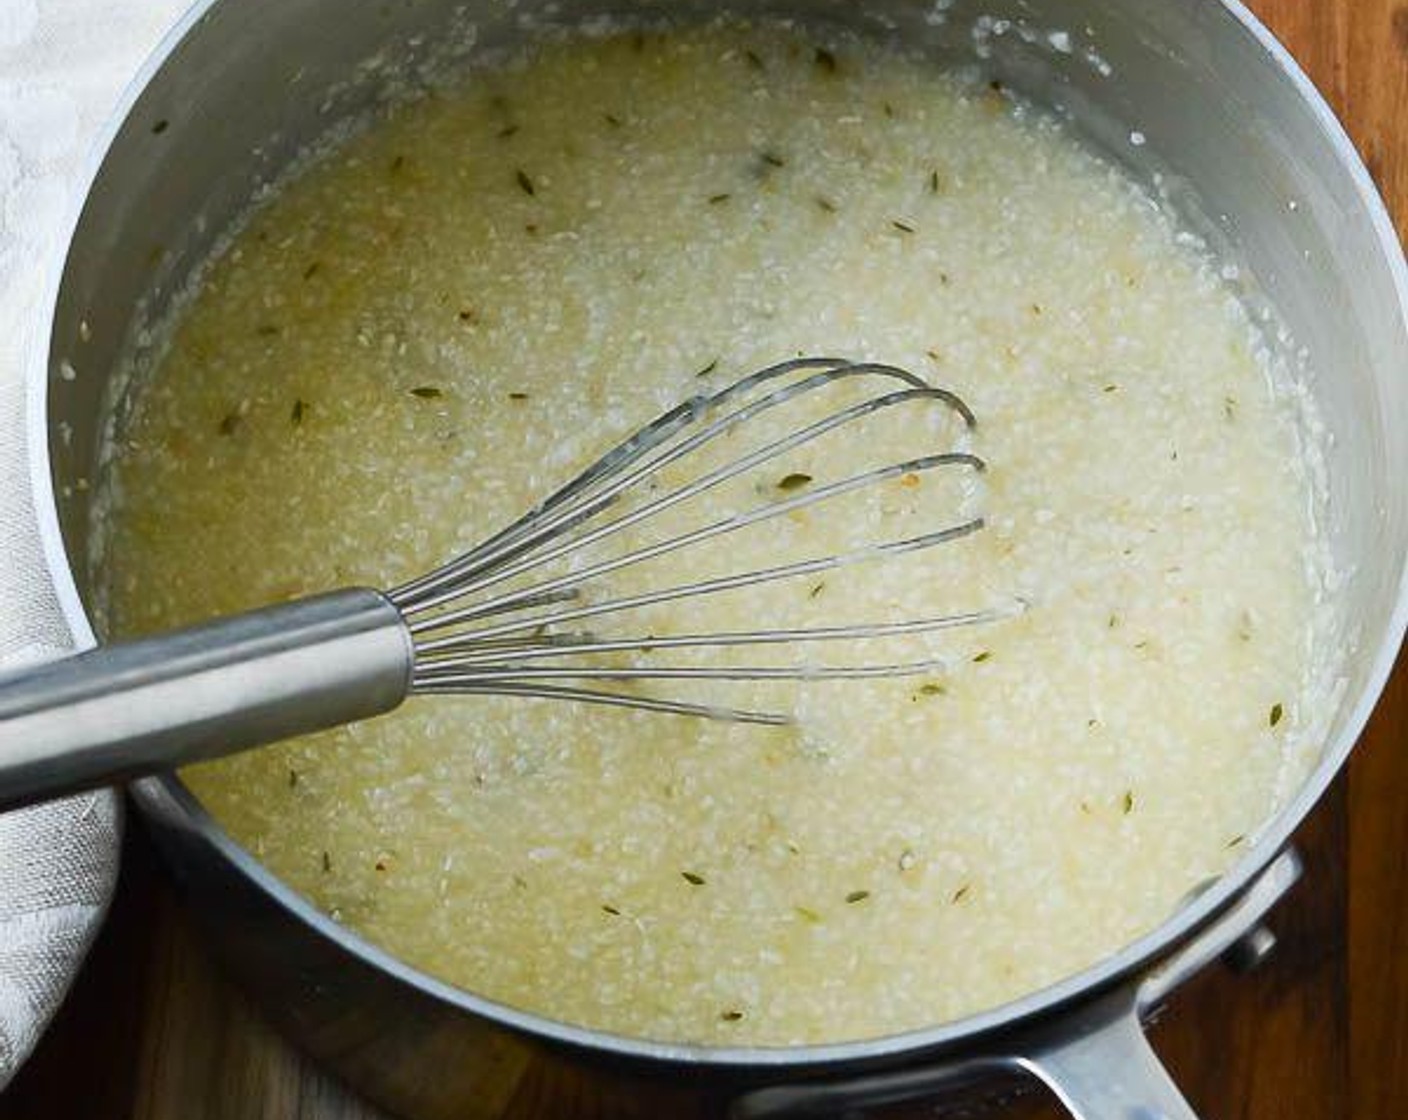 step 6 Whisk in the grits and once the liquid returns to a boil, reduce heat to low, cover and stir frequently 30-35 minutes, until thick and creamy. Be sure to scrape the bottom of the pan as the grits cook, so they don't stick.